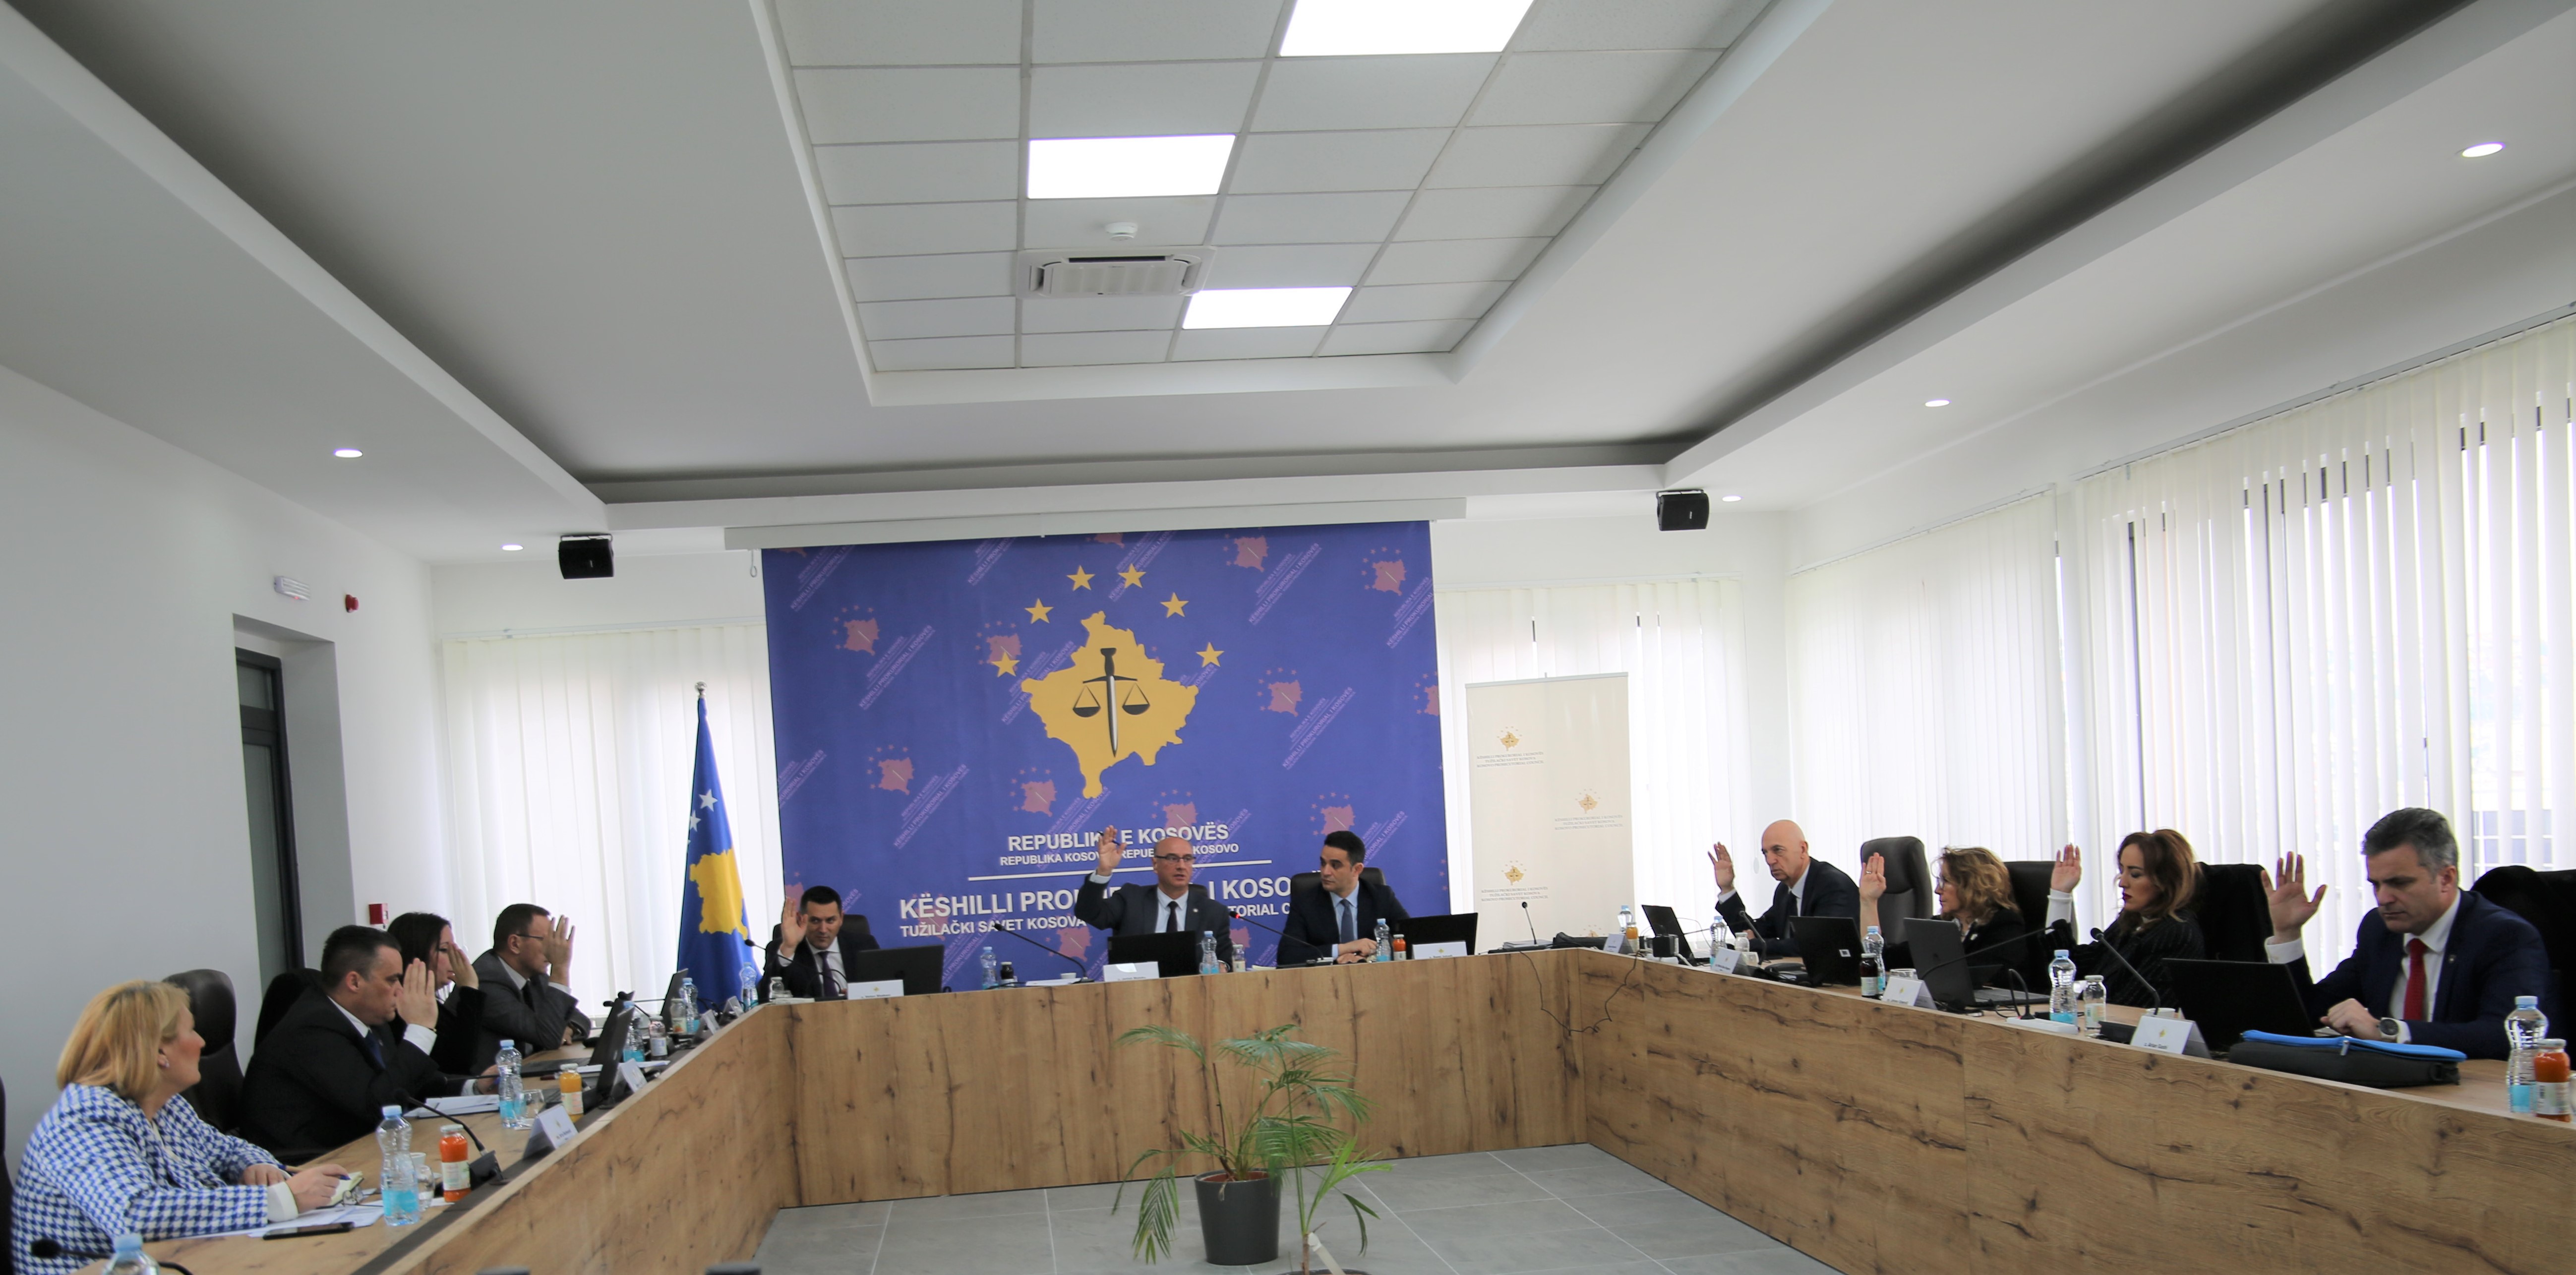 The public call for the nomination of candidates for the position of Chairman and Deputy Chairman of the Prosecutorial Council is opened and the competition for the recruitment of 28 new prosecutors is announced